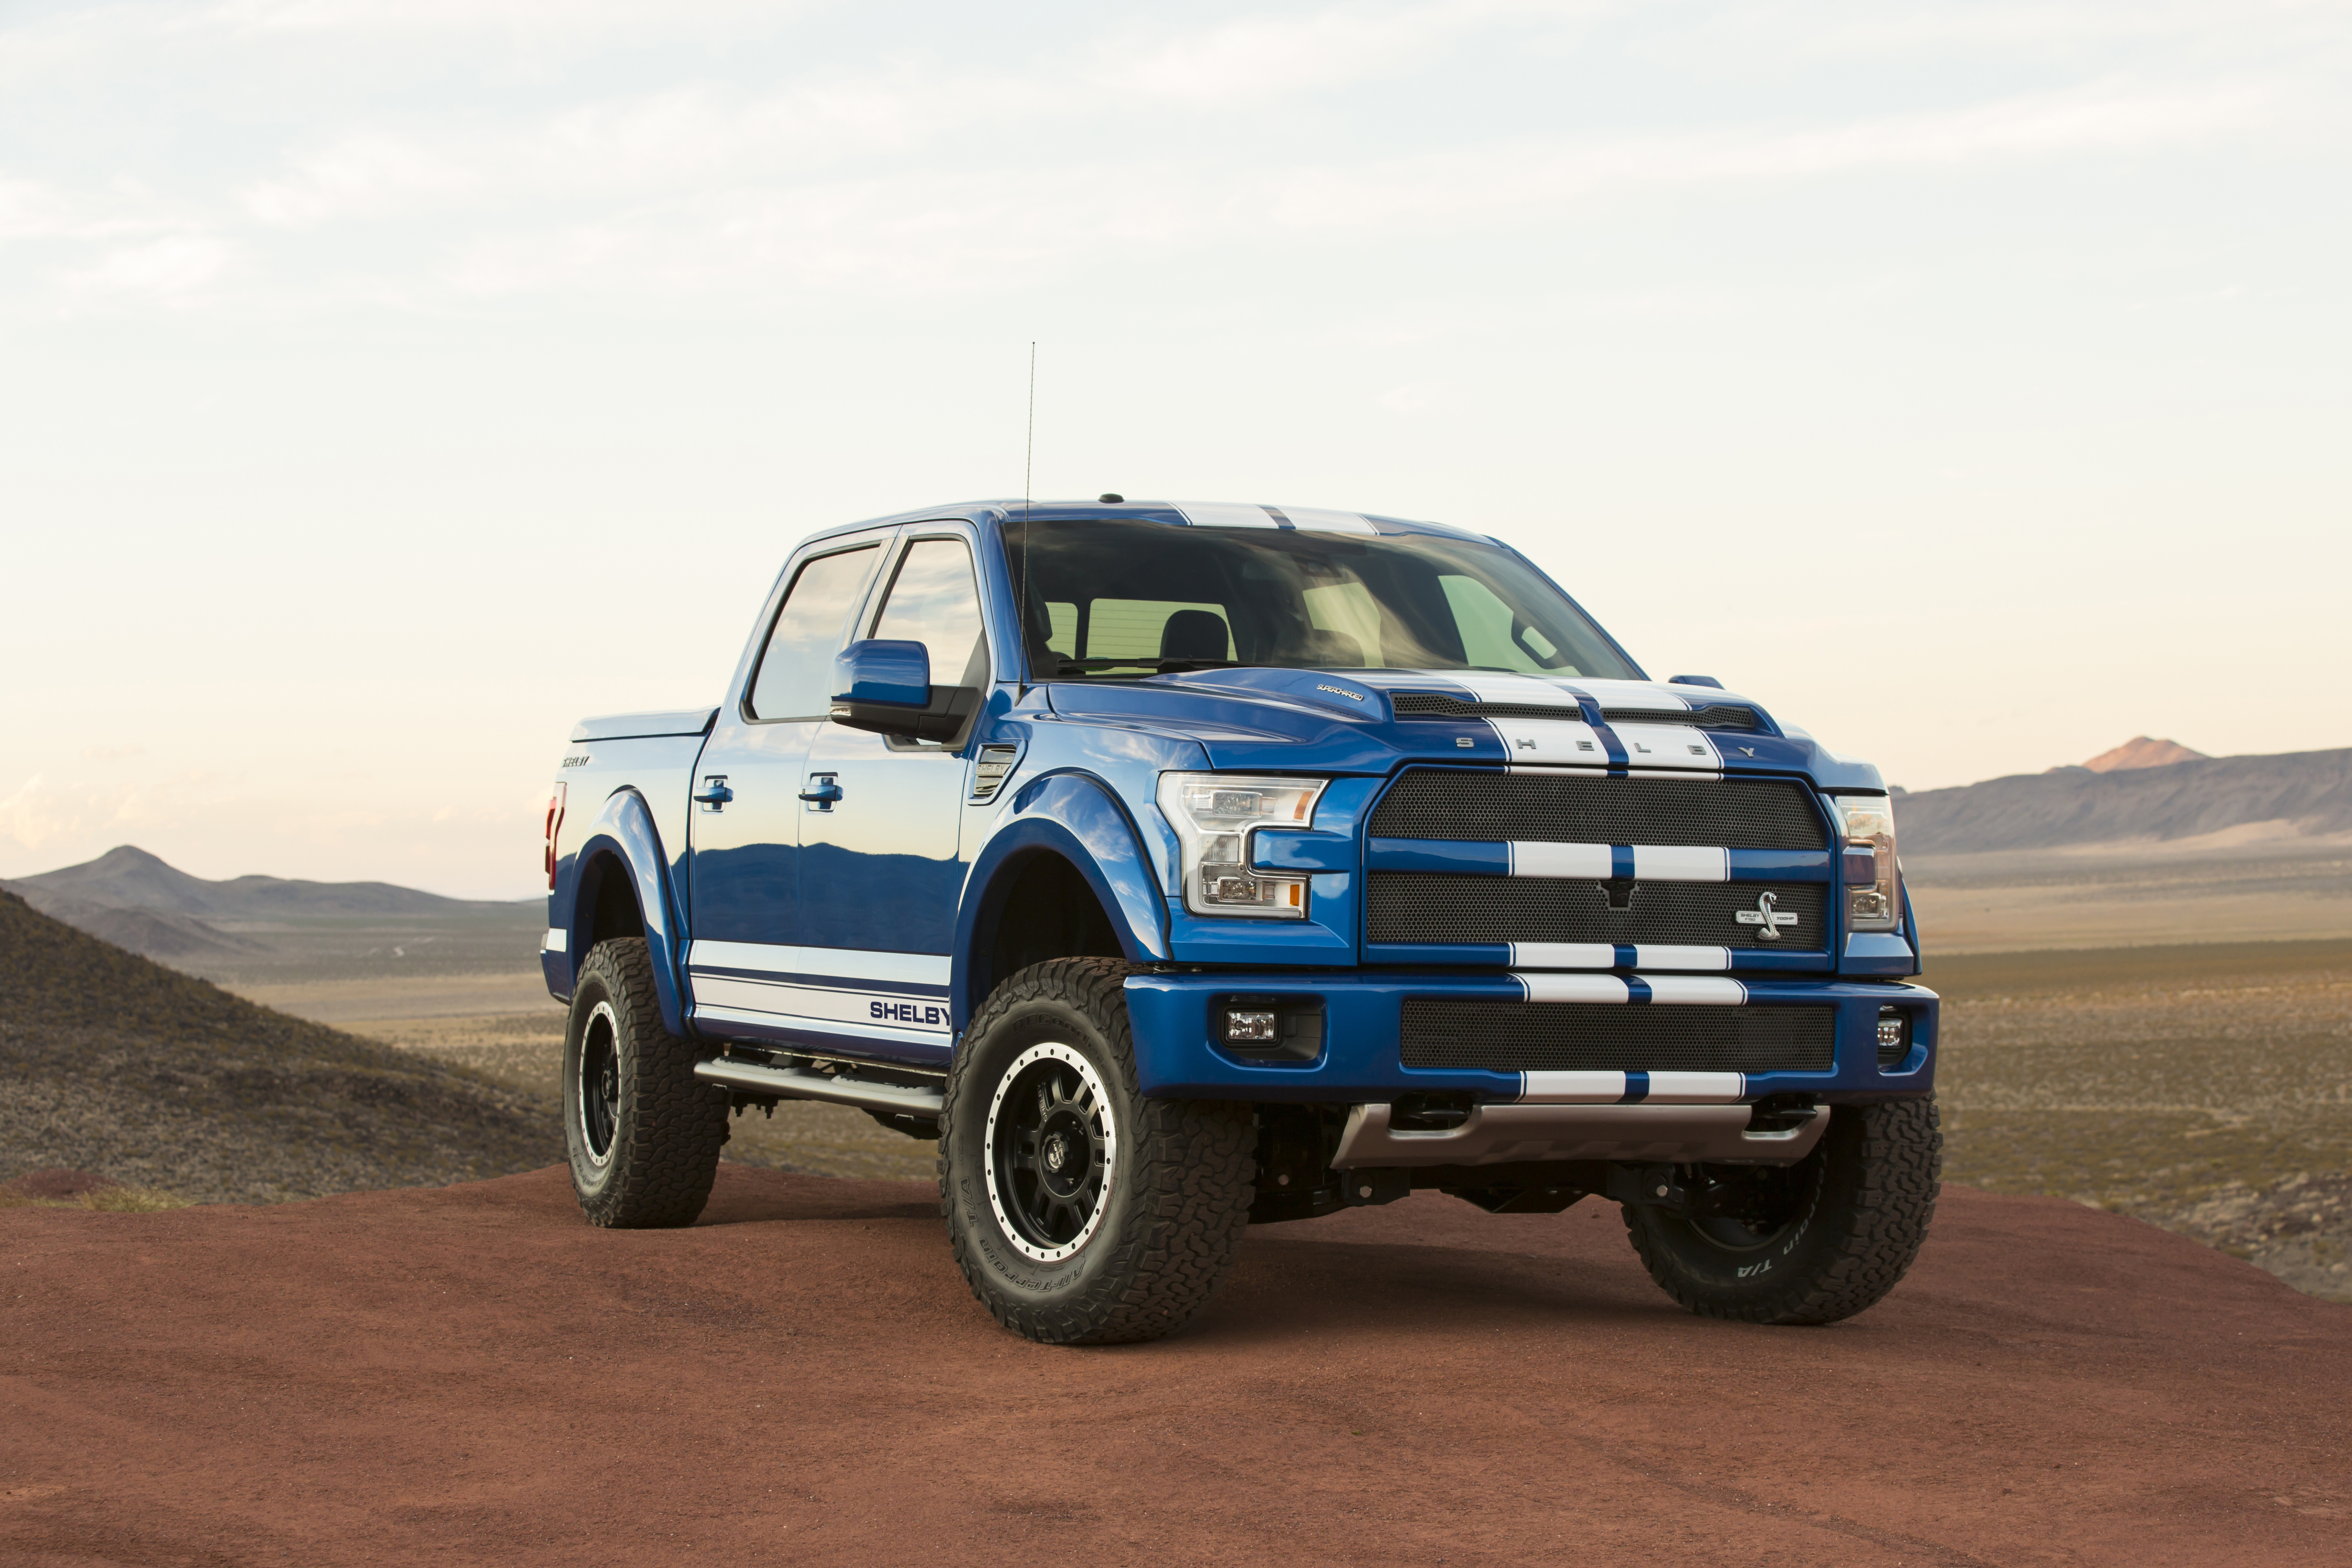 Shelby American And Tuscany Motor Co Team Up To Introduce The All New 700hp 2016 Shelby F 150 At Sema Show In Las Vegas Business Wire